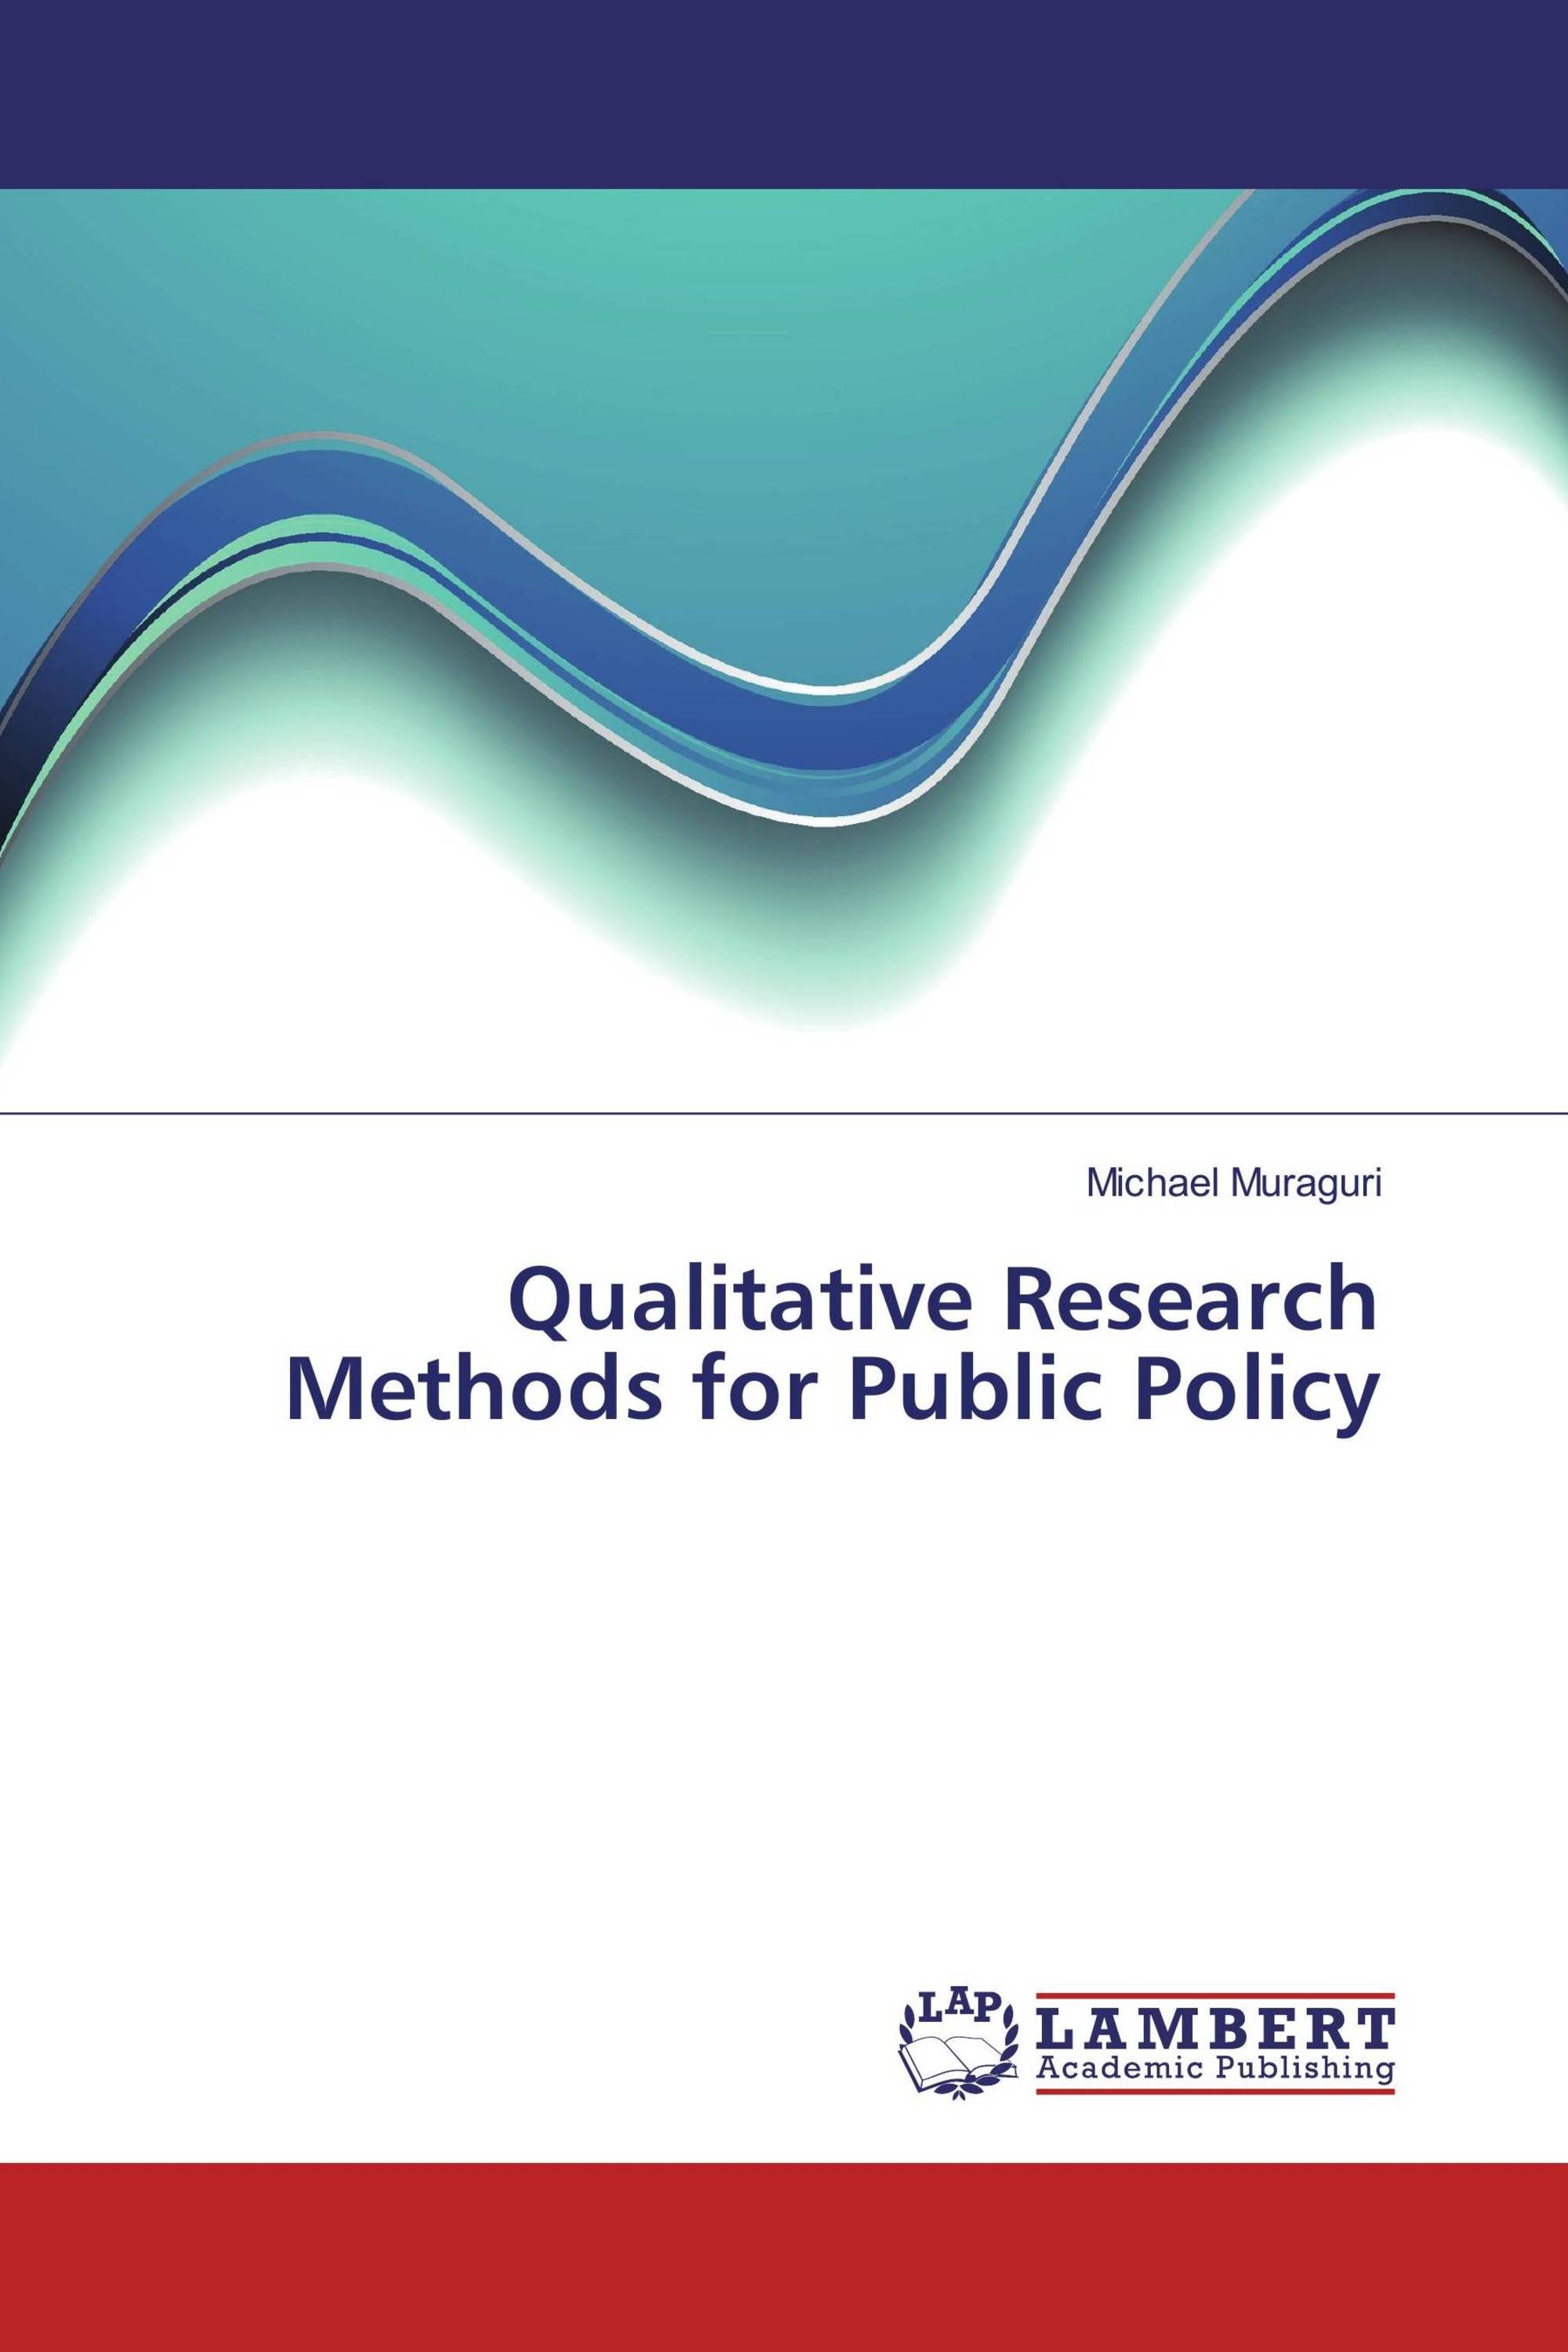 research papers for public policy